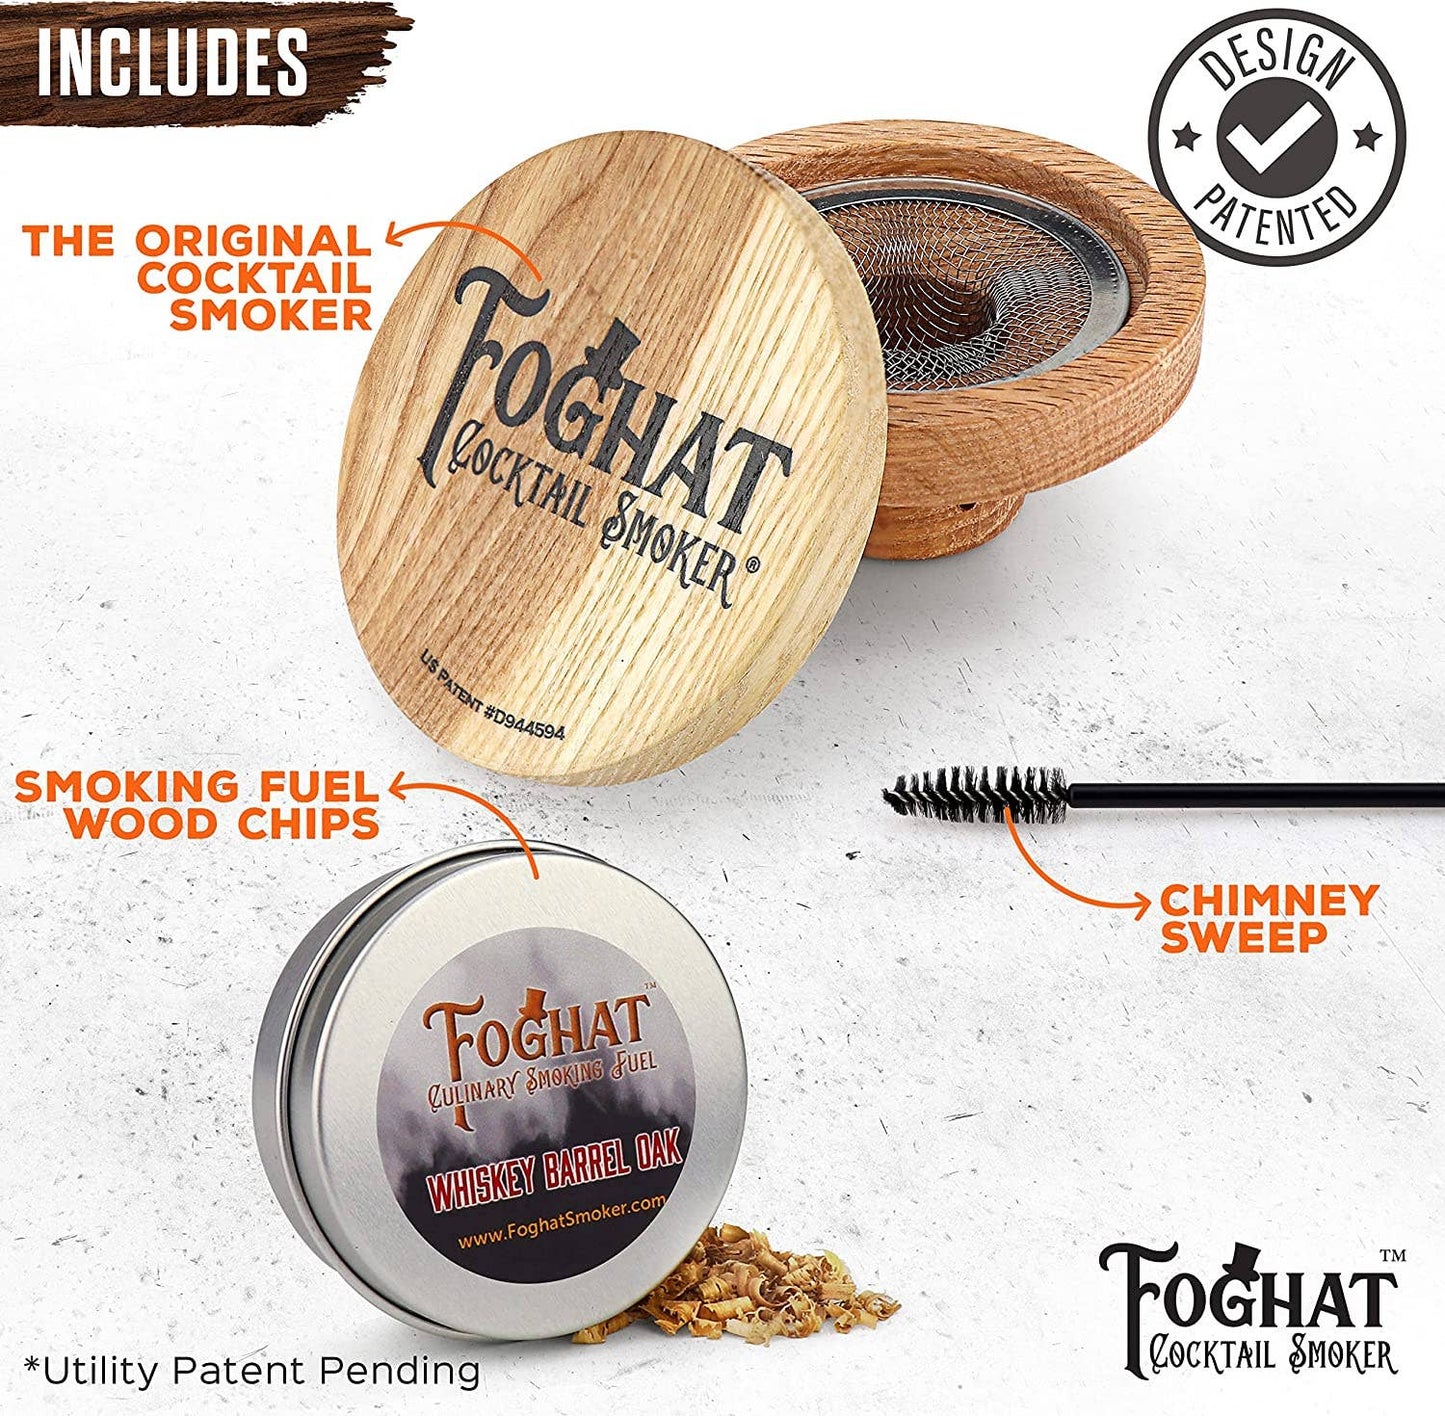 Foghat Cocktail Smoker™ Includes Chimney Sweep, The Original Smoker and Smoking Fuel Wood Chips